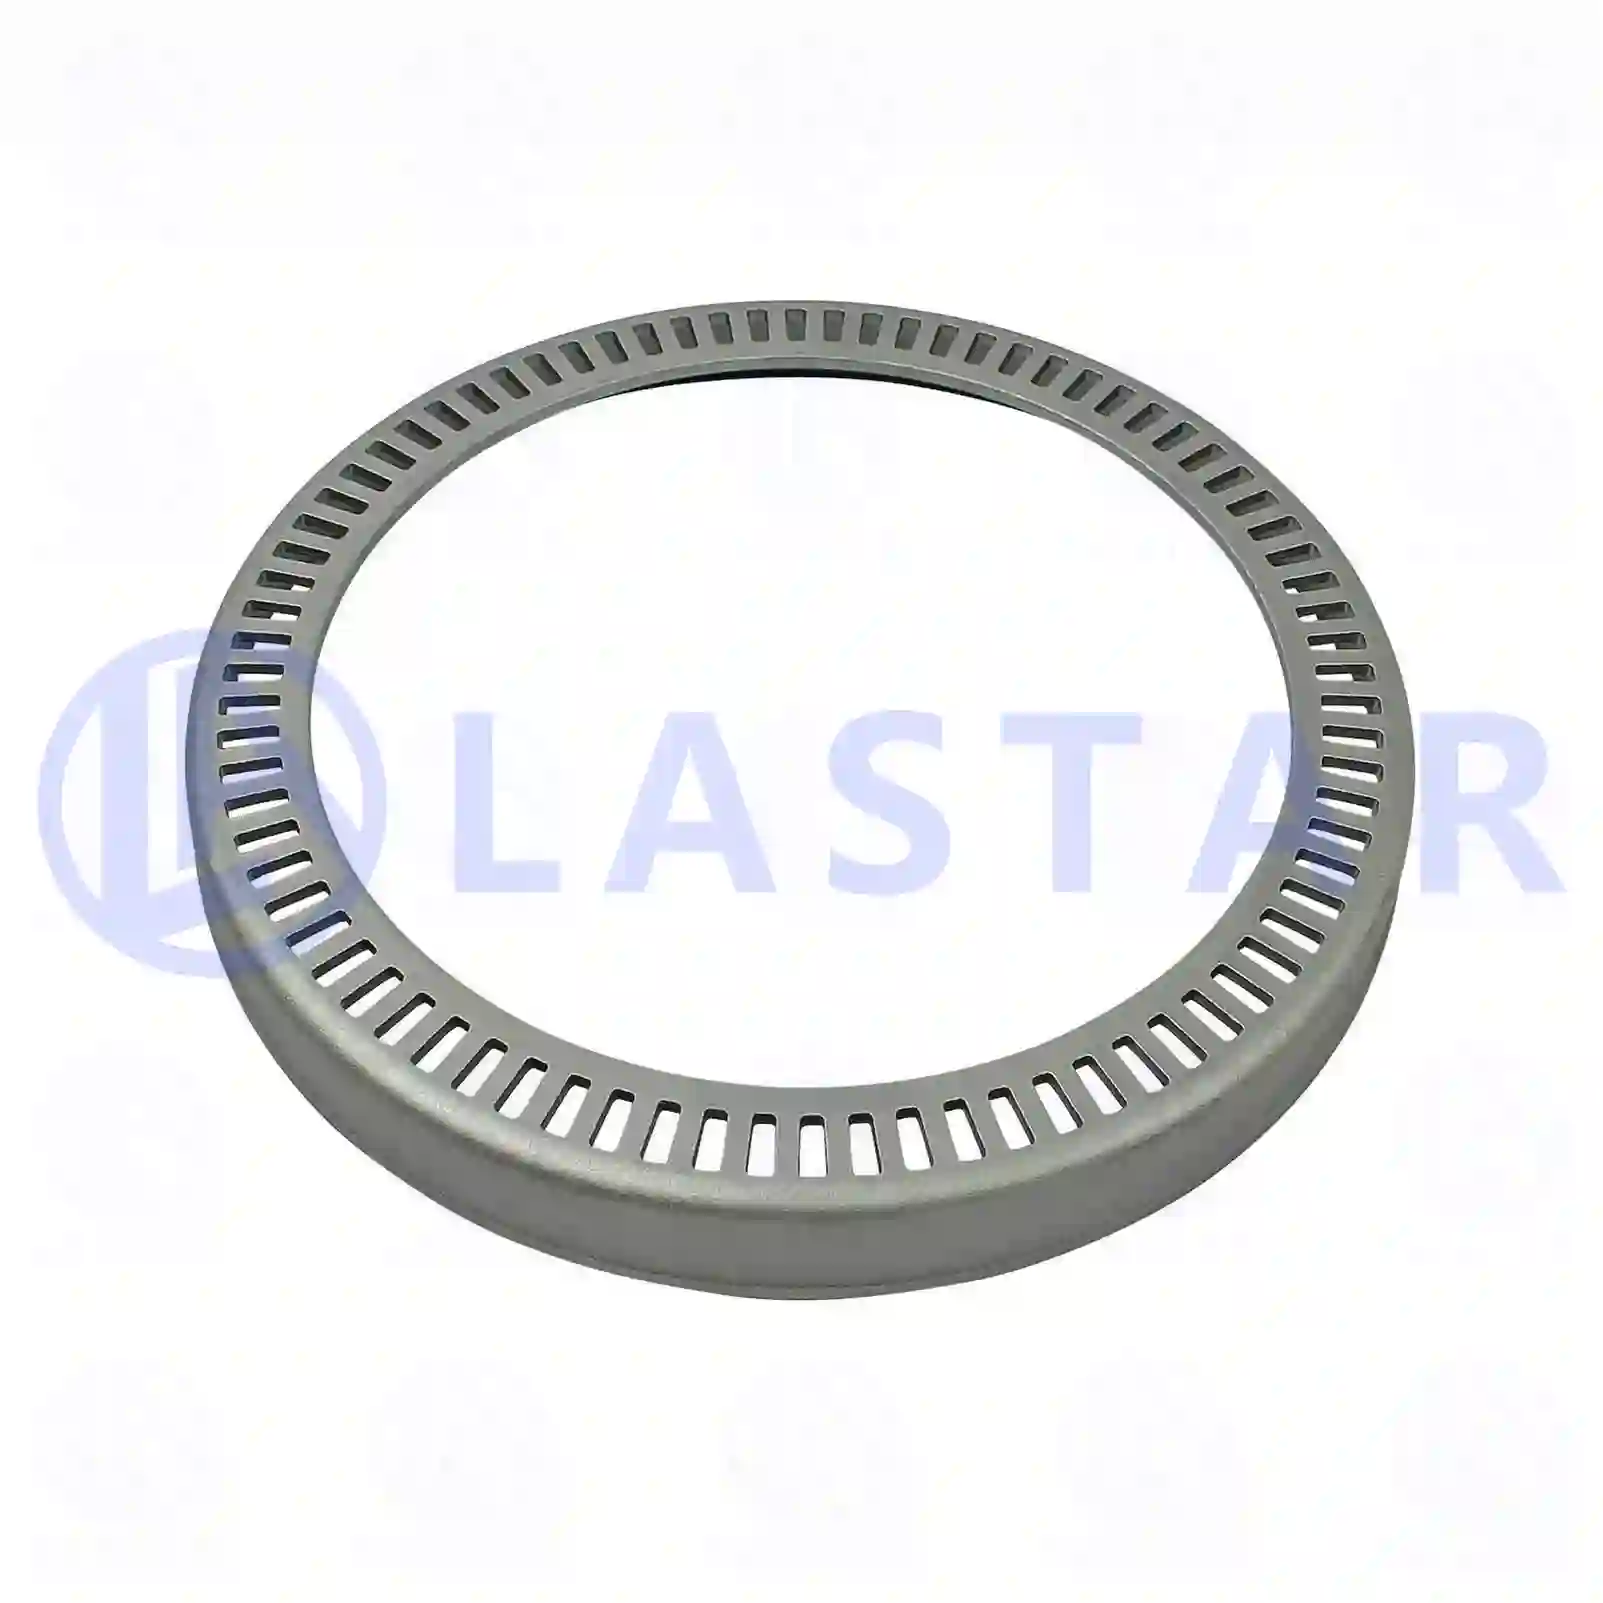 ABS ring, 77726375, 9723340115, ZG50017-0008, , ||  77726375 Lastar Spare Part | Truck Spare Parts, Auotomotive Spare Parts ABS ring, 77726375, 9723340115, ZG50017-0008, , ||  77726375 Lastar Spare Part | Truck Spare Parts, Auotomotive Spare Parts